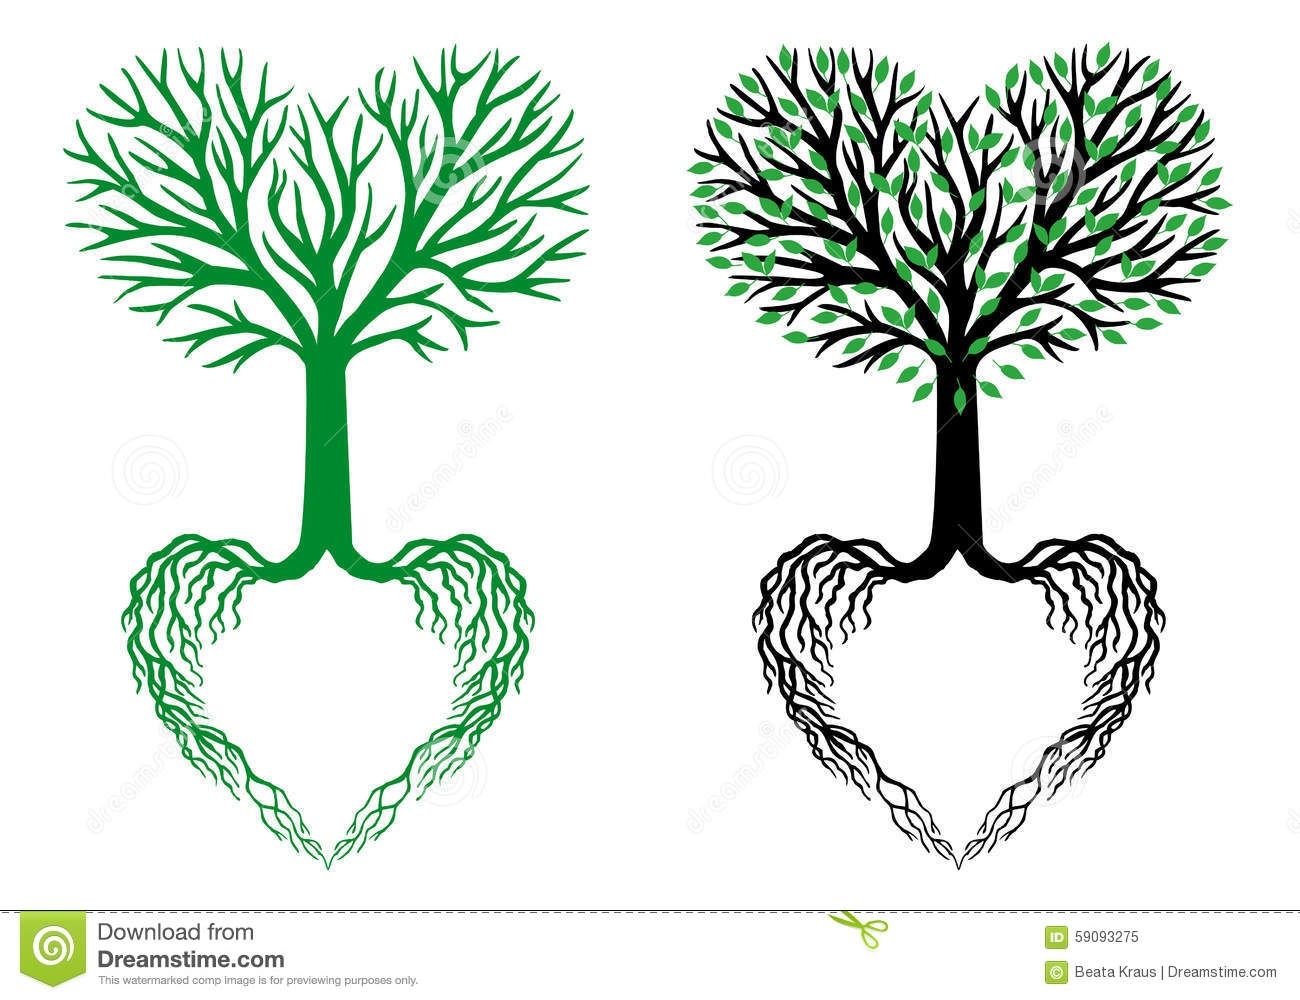 Roots clipart tree life